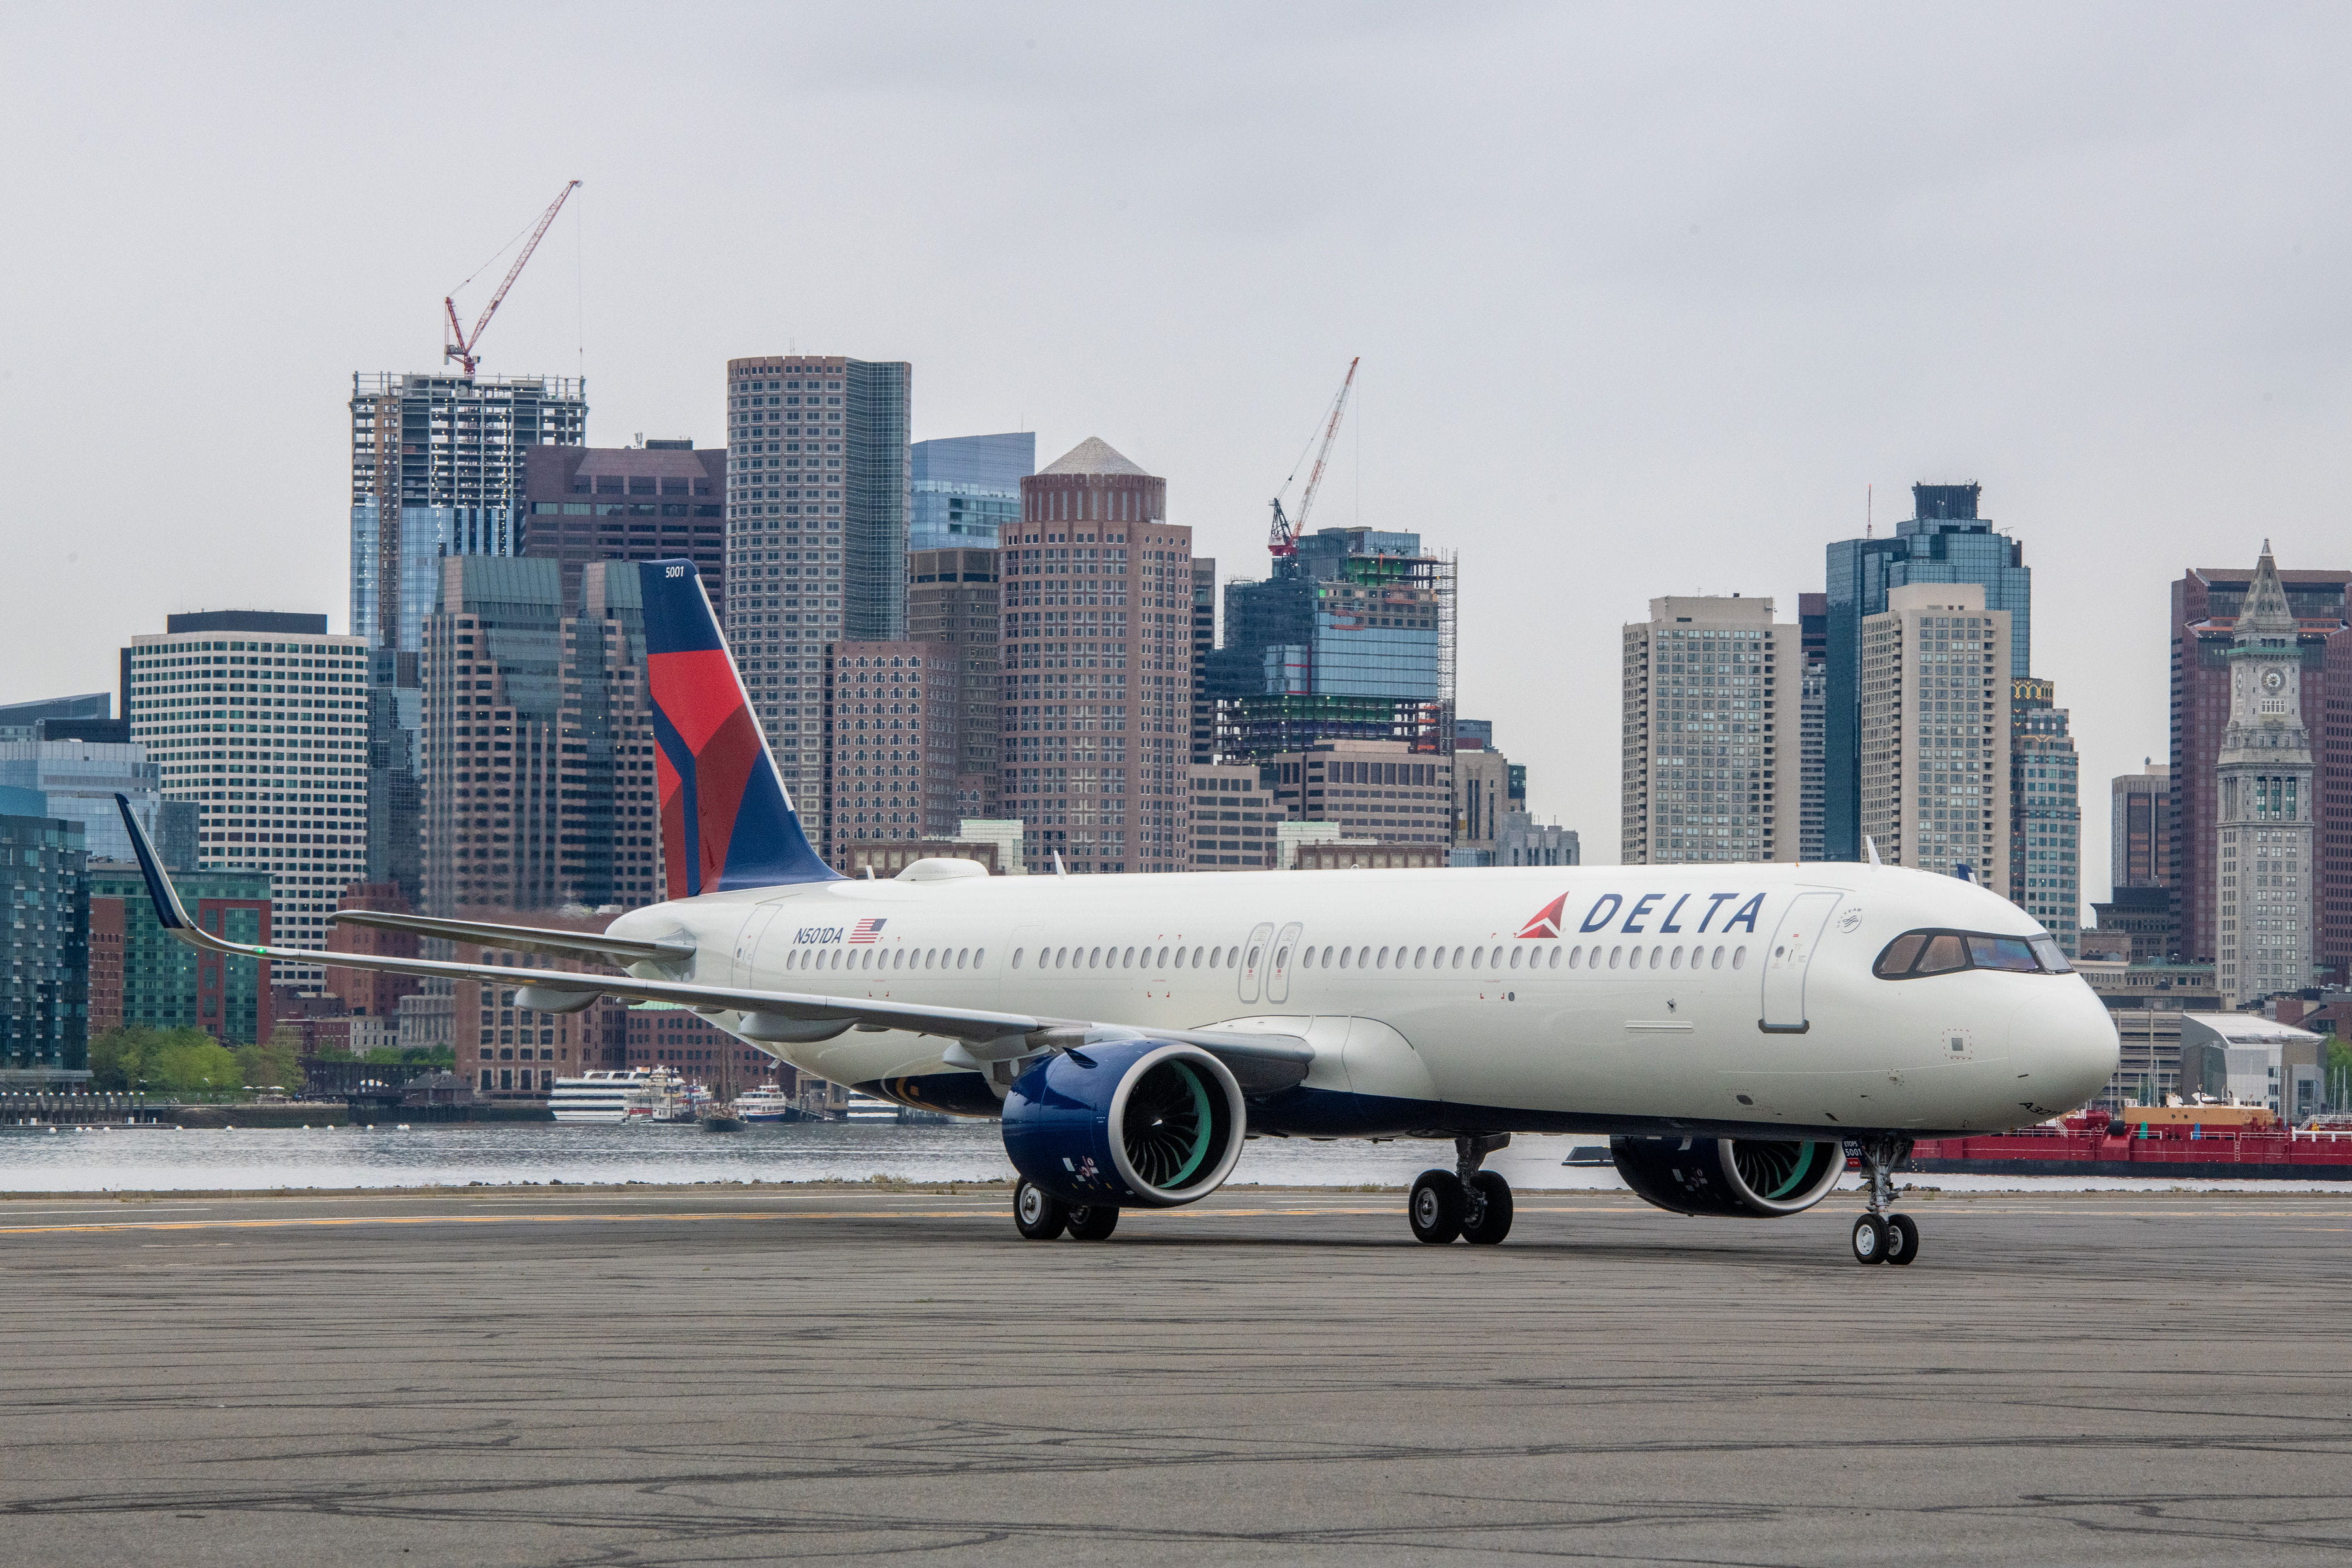 Delta Air Lines Expands Fleet with New Airbus A321neo Order